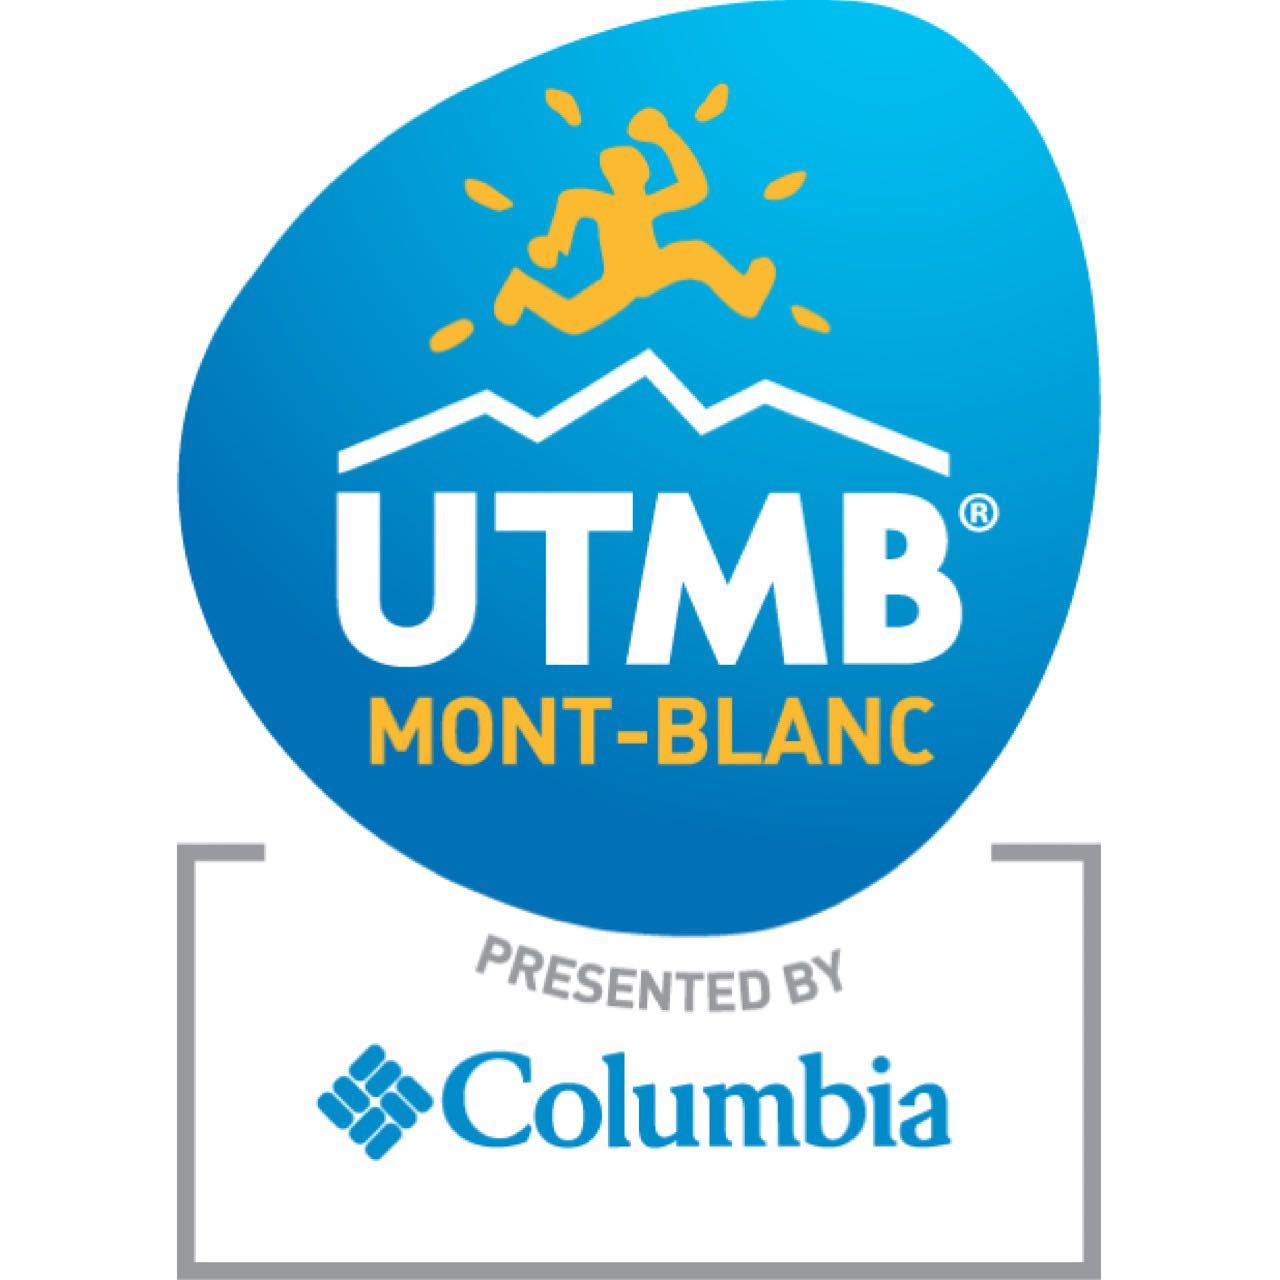 Earn 2-4 ITRA and UTMB(r) points for finishing the Bronze to Gold Ultra Peak District Challenge e...